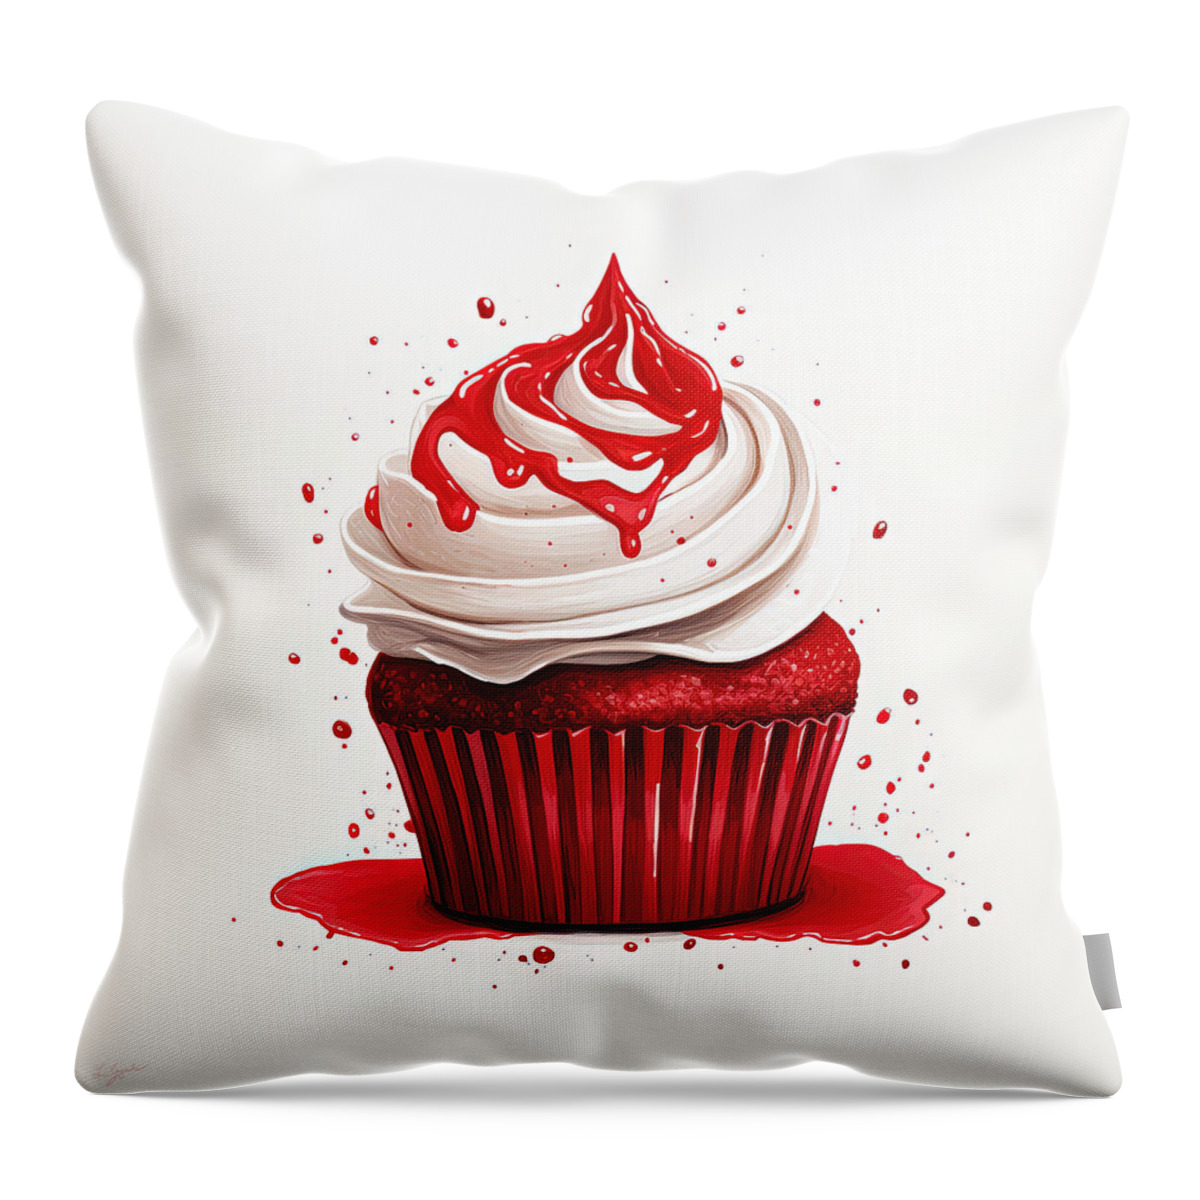 Colorful Cupcake Artwork Throw Pillow featuring the digital art Red Velvet by Lourry Legarde